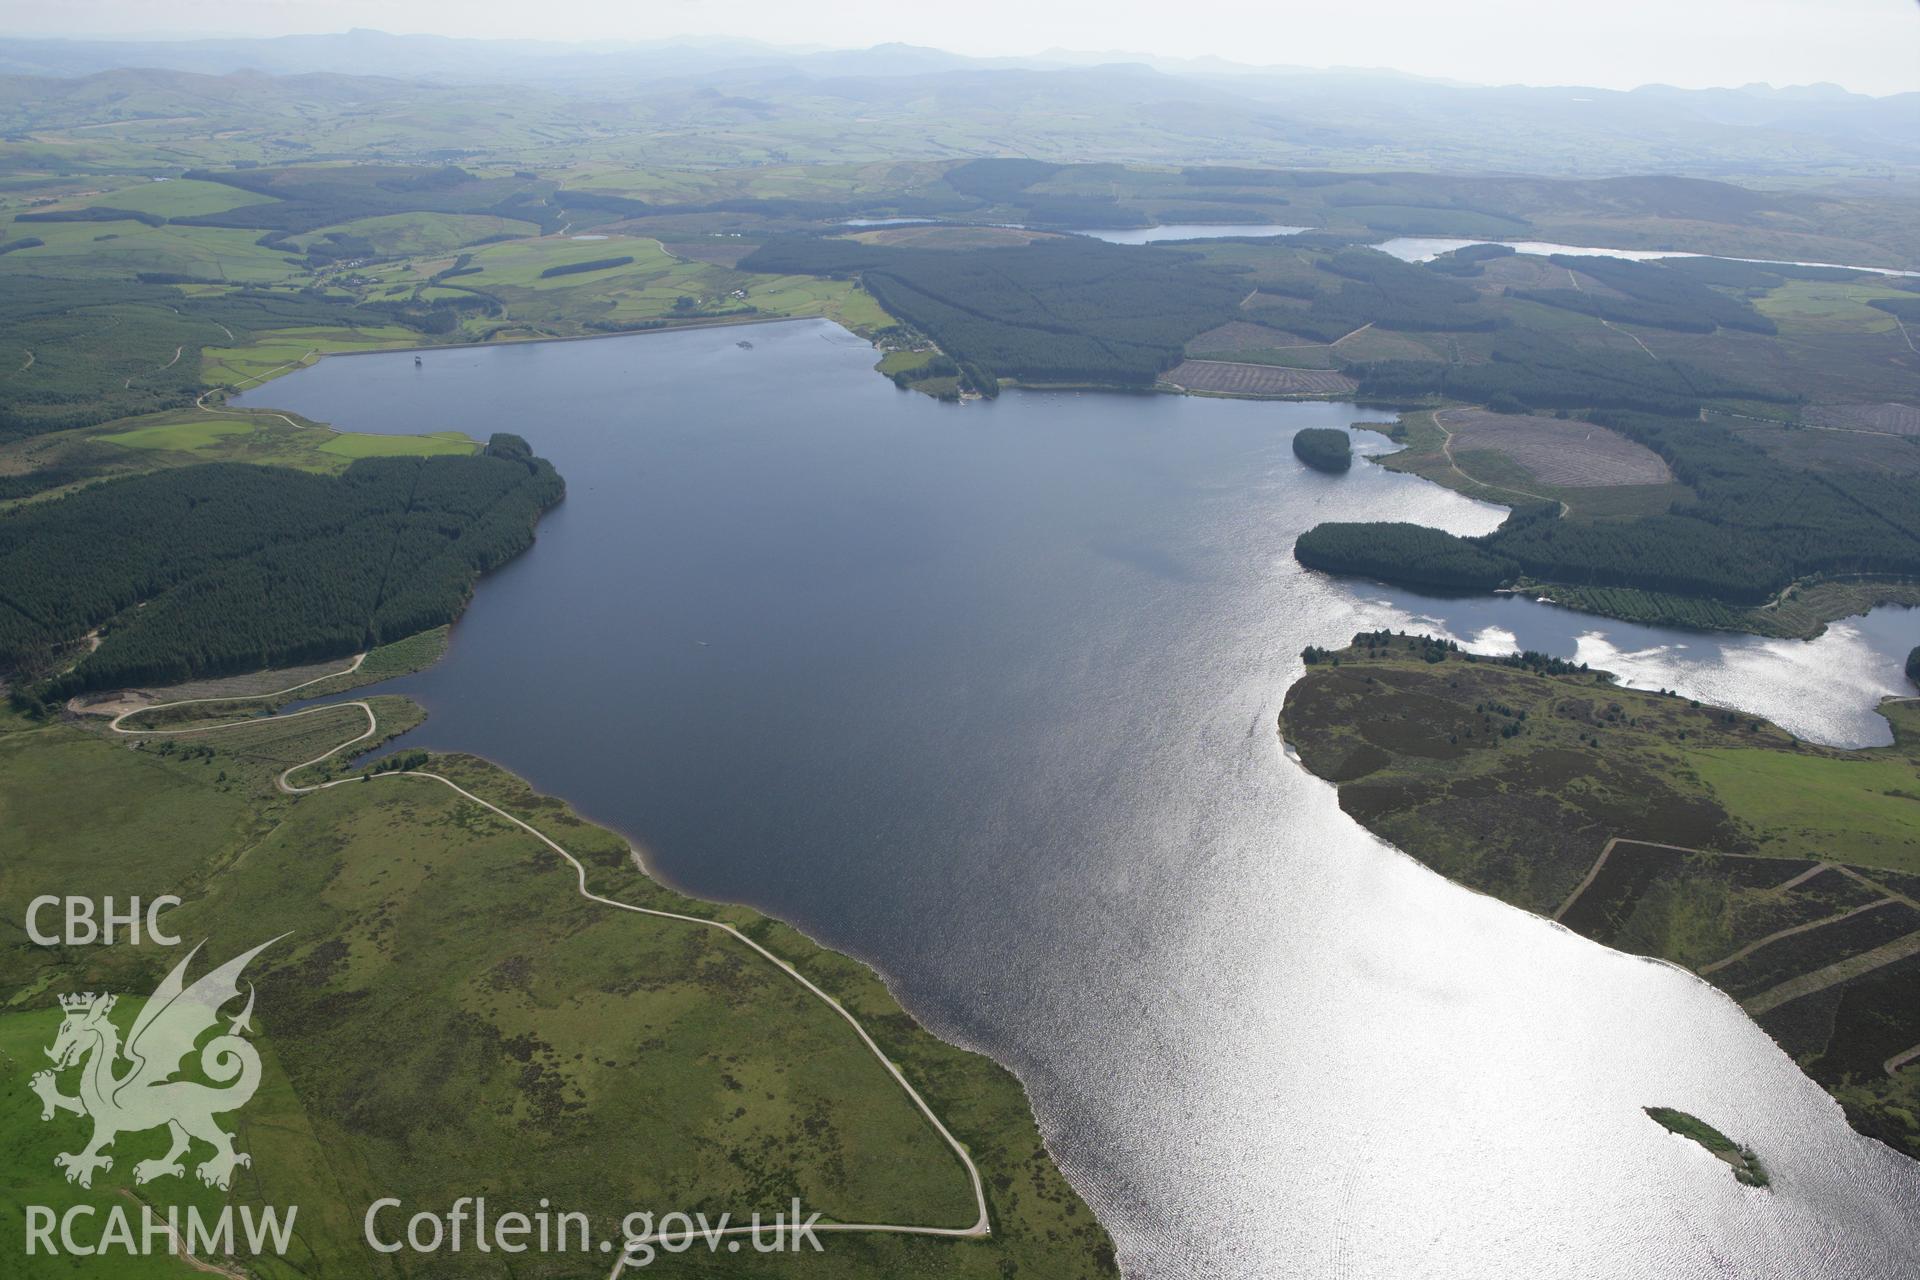 RCAHMW colour oblique aerial photograph showing landscape of Llyn Brenig. Taken on 31 July 2007 by Toby Driver